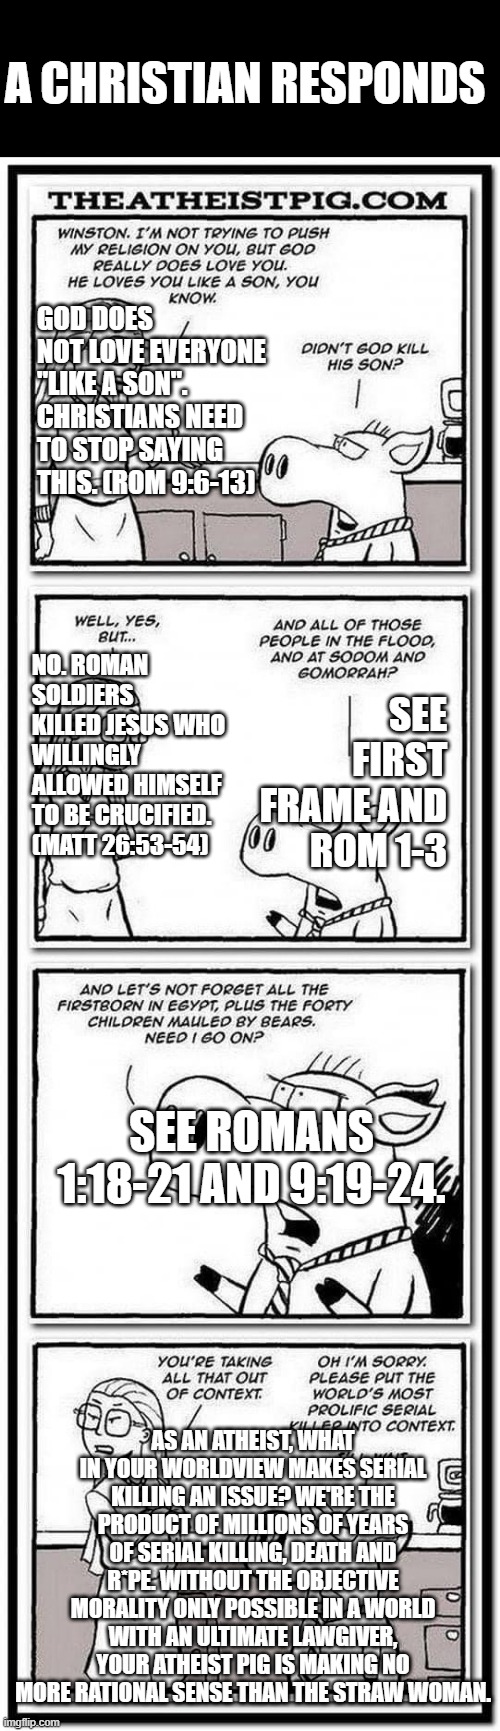 Responding to atheist comic | A CHRISTIAN RESPONDS; GOD DOES NOT LOVE EVERYONE "LIKE A SON". CHRISTIANS NEED TO STOP SAYING THIS. (ROM 9:6-13); NO. ROMAN SOLDIERS KILLED JESUS WHO WILLINGLY ALLOWED HIMSELF TO BE CRUCIFIED. (MATT 26:53-54); SEE FIRST FRAME AND ROM 1-3; SEE ROMANS 1:18-21 AND 9:19-24. AS AN ATHEIST, WHAT IN YOUR WORLDVIEW MAKES SERIAL KILLING AN ISSUE? WE'RE THE PRODUCT OF MILLIONS OF YEARS OF SERIAL KILLING, DEATH AND R*PE. WITHOUT THE OBJECTIVE MORALITY ONLY POSSIBLE IN A WORLD WITH AN ULTIMATE LAWGIVER, YOUR ATHEIST PIG IS MAKING NO MORE RATIONAL SENSE THAN THE STRAW WOMAN. | image tagged in god the world s most prolific serial killer,response,christian,christian apologists,atheist | made w/ Imgflip meme maker